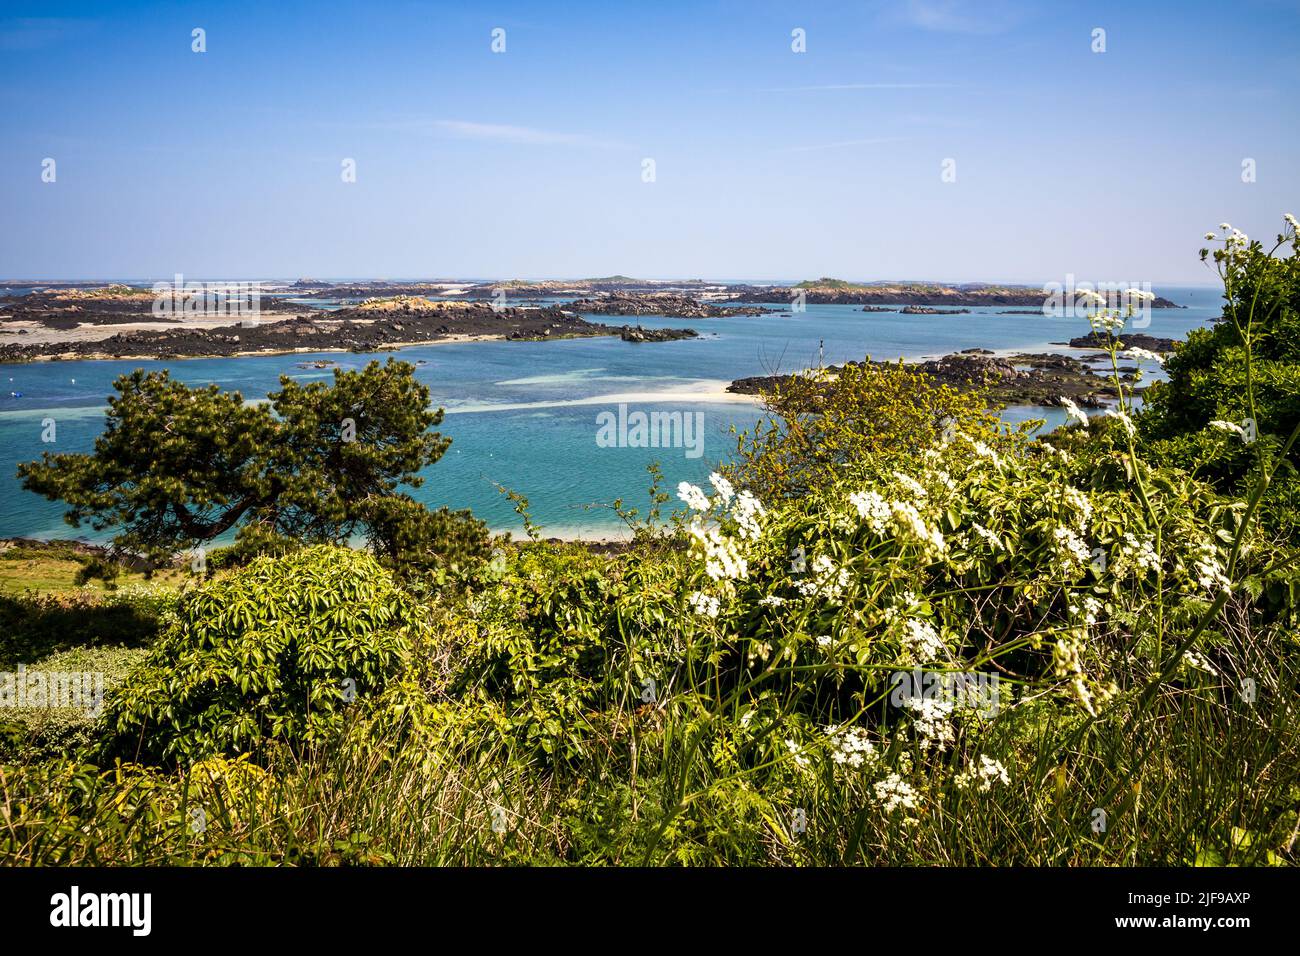 Chausey island coast and cliffs landscape in Brittany, France Stock Photo